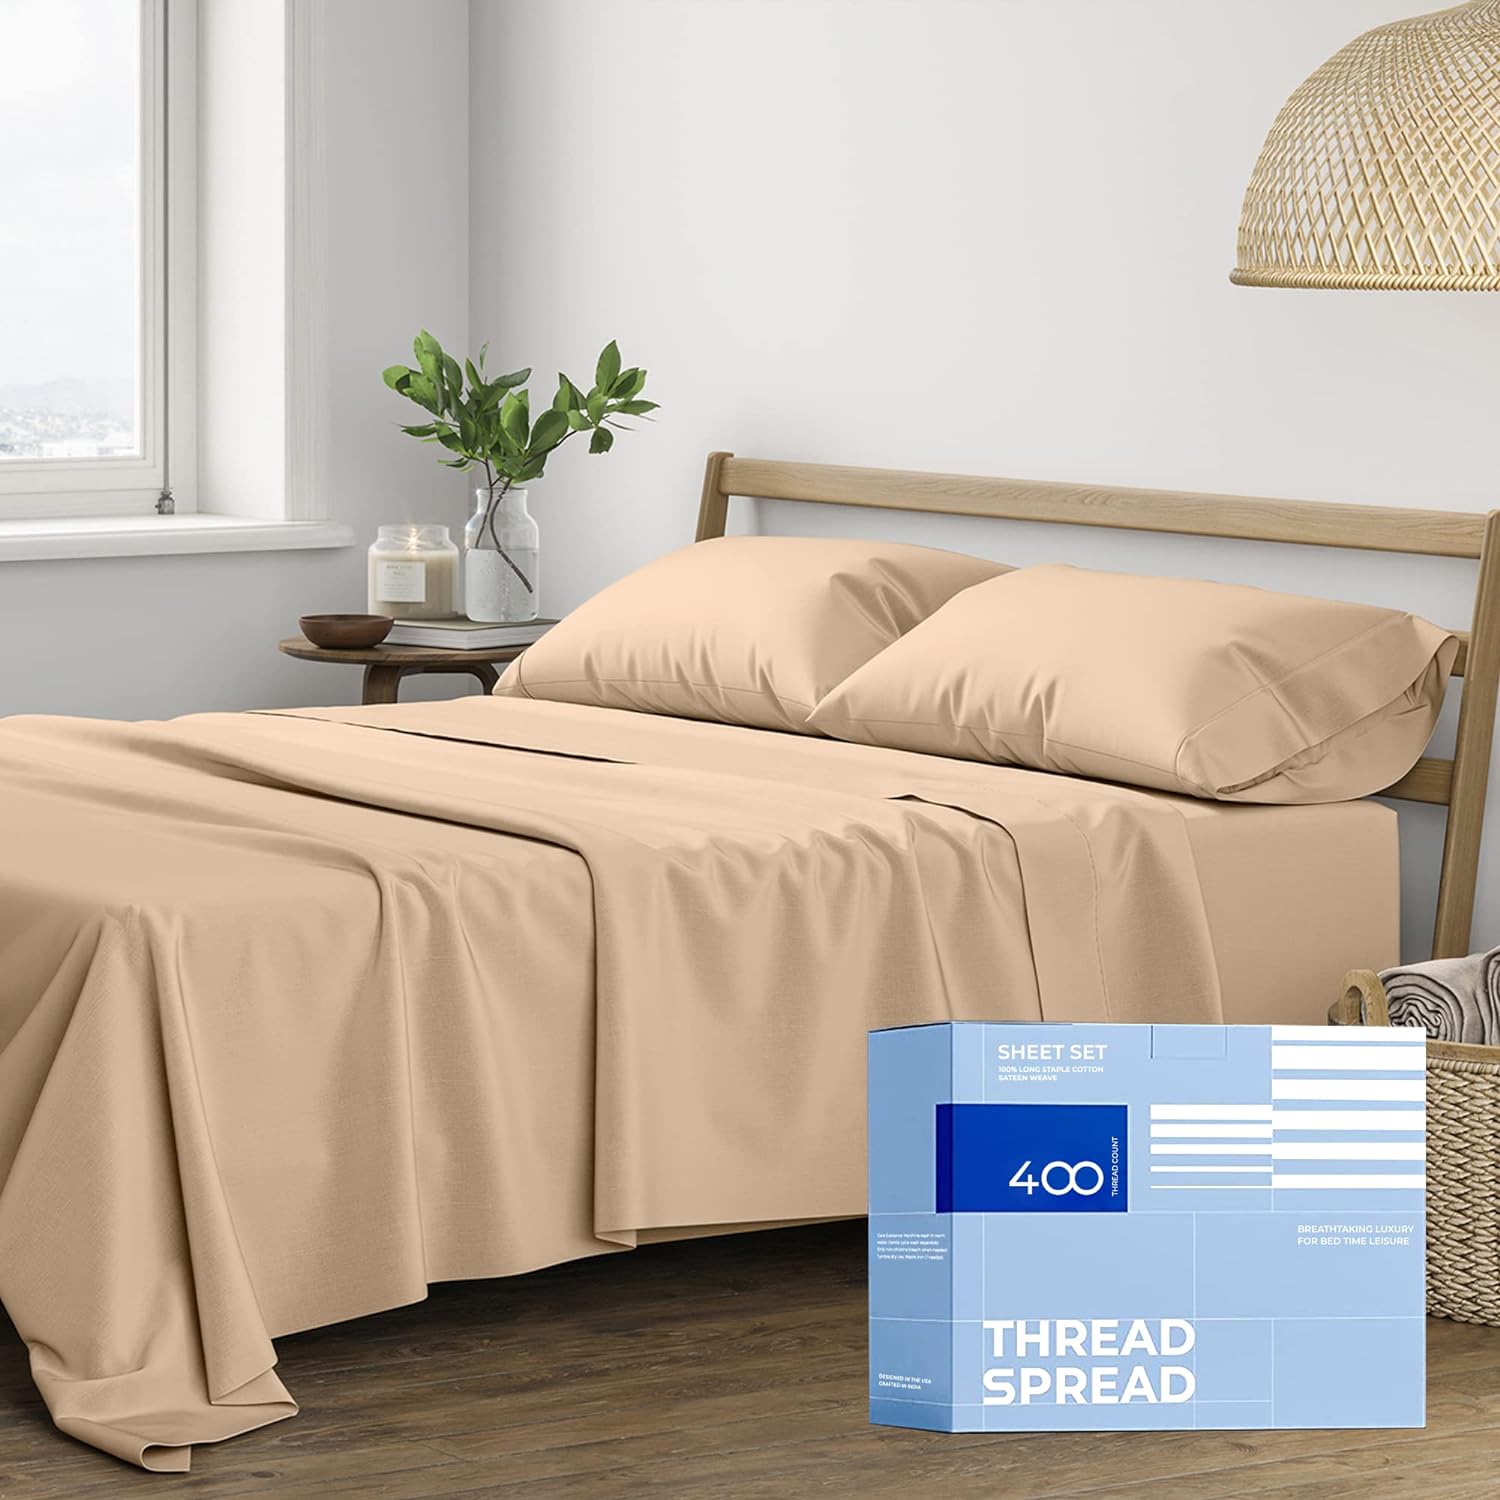 THREAD SPREAD 100% Cotton Sheets for Queen Size Bed - 400 Thread Count 4 Piece Cotton Sheet Set - Soft, Breathable Ultra Cooling Sheets - Deep Pocket Queen Bed Sheets - Sateen Weave Bedsheet (Taupe)